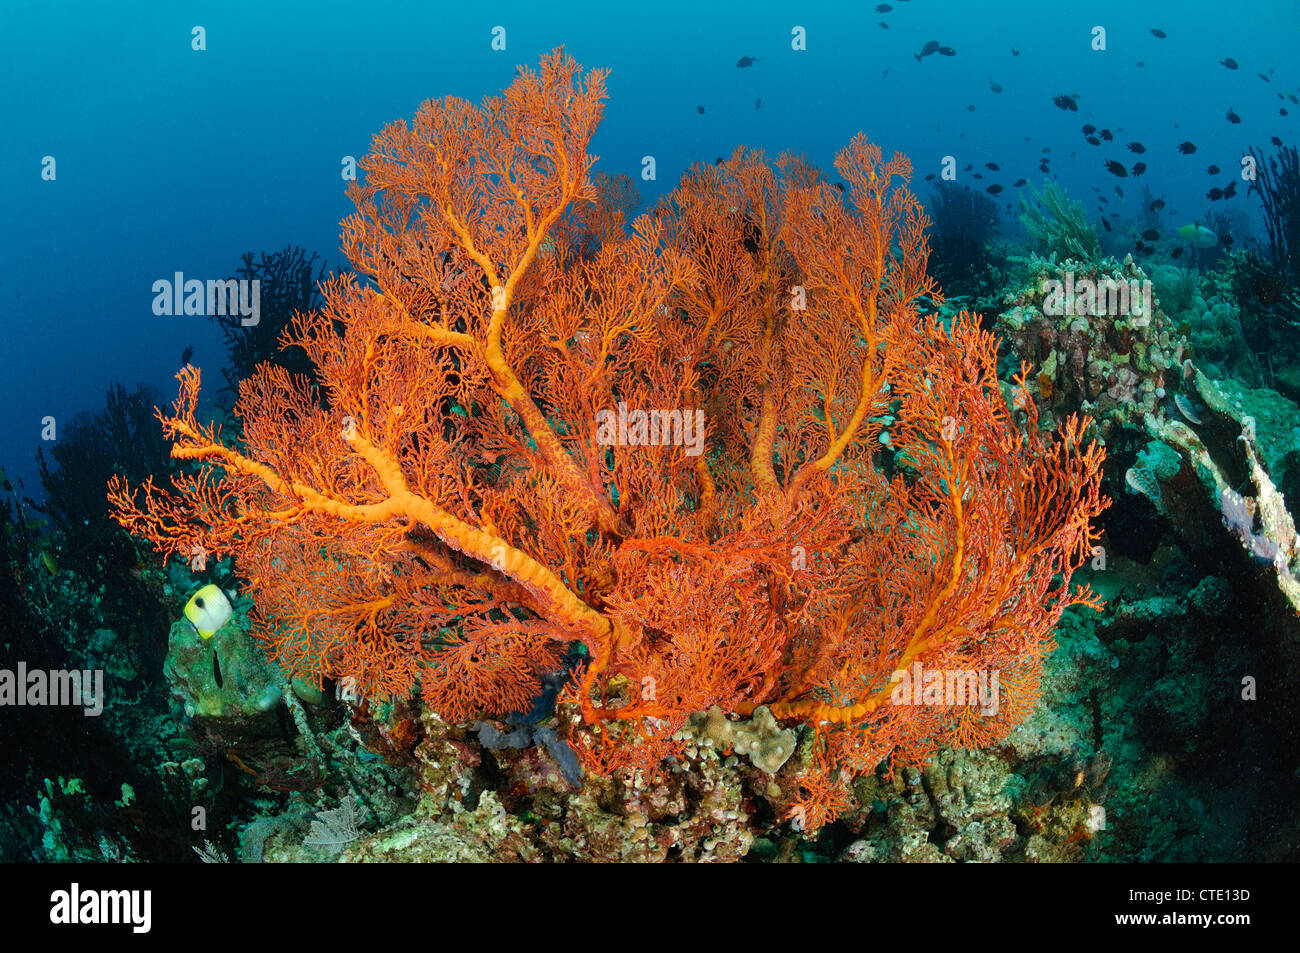 Seafan in Coral Reef, Melithaea sp., Manado, Nord Sulawesi, Indonesia Foto Stock